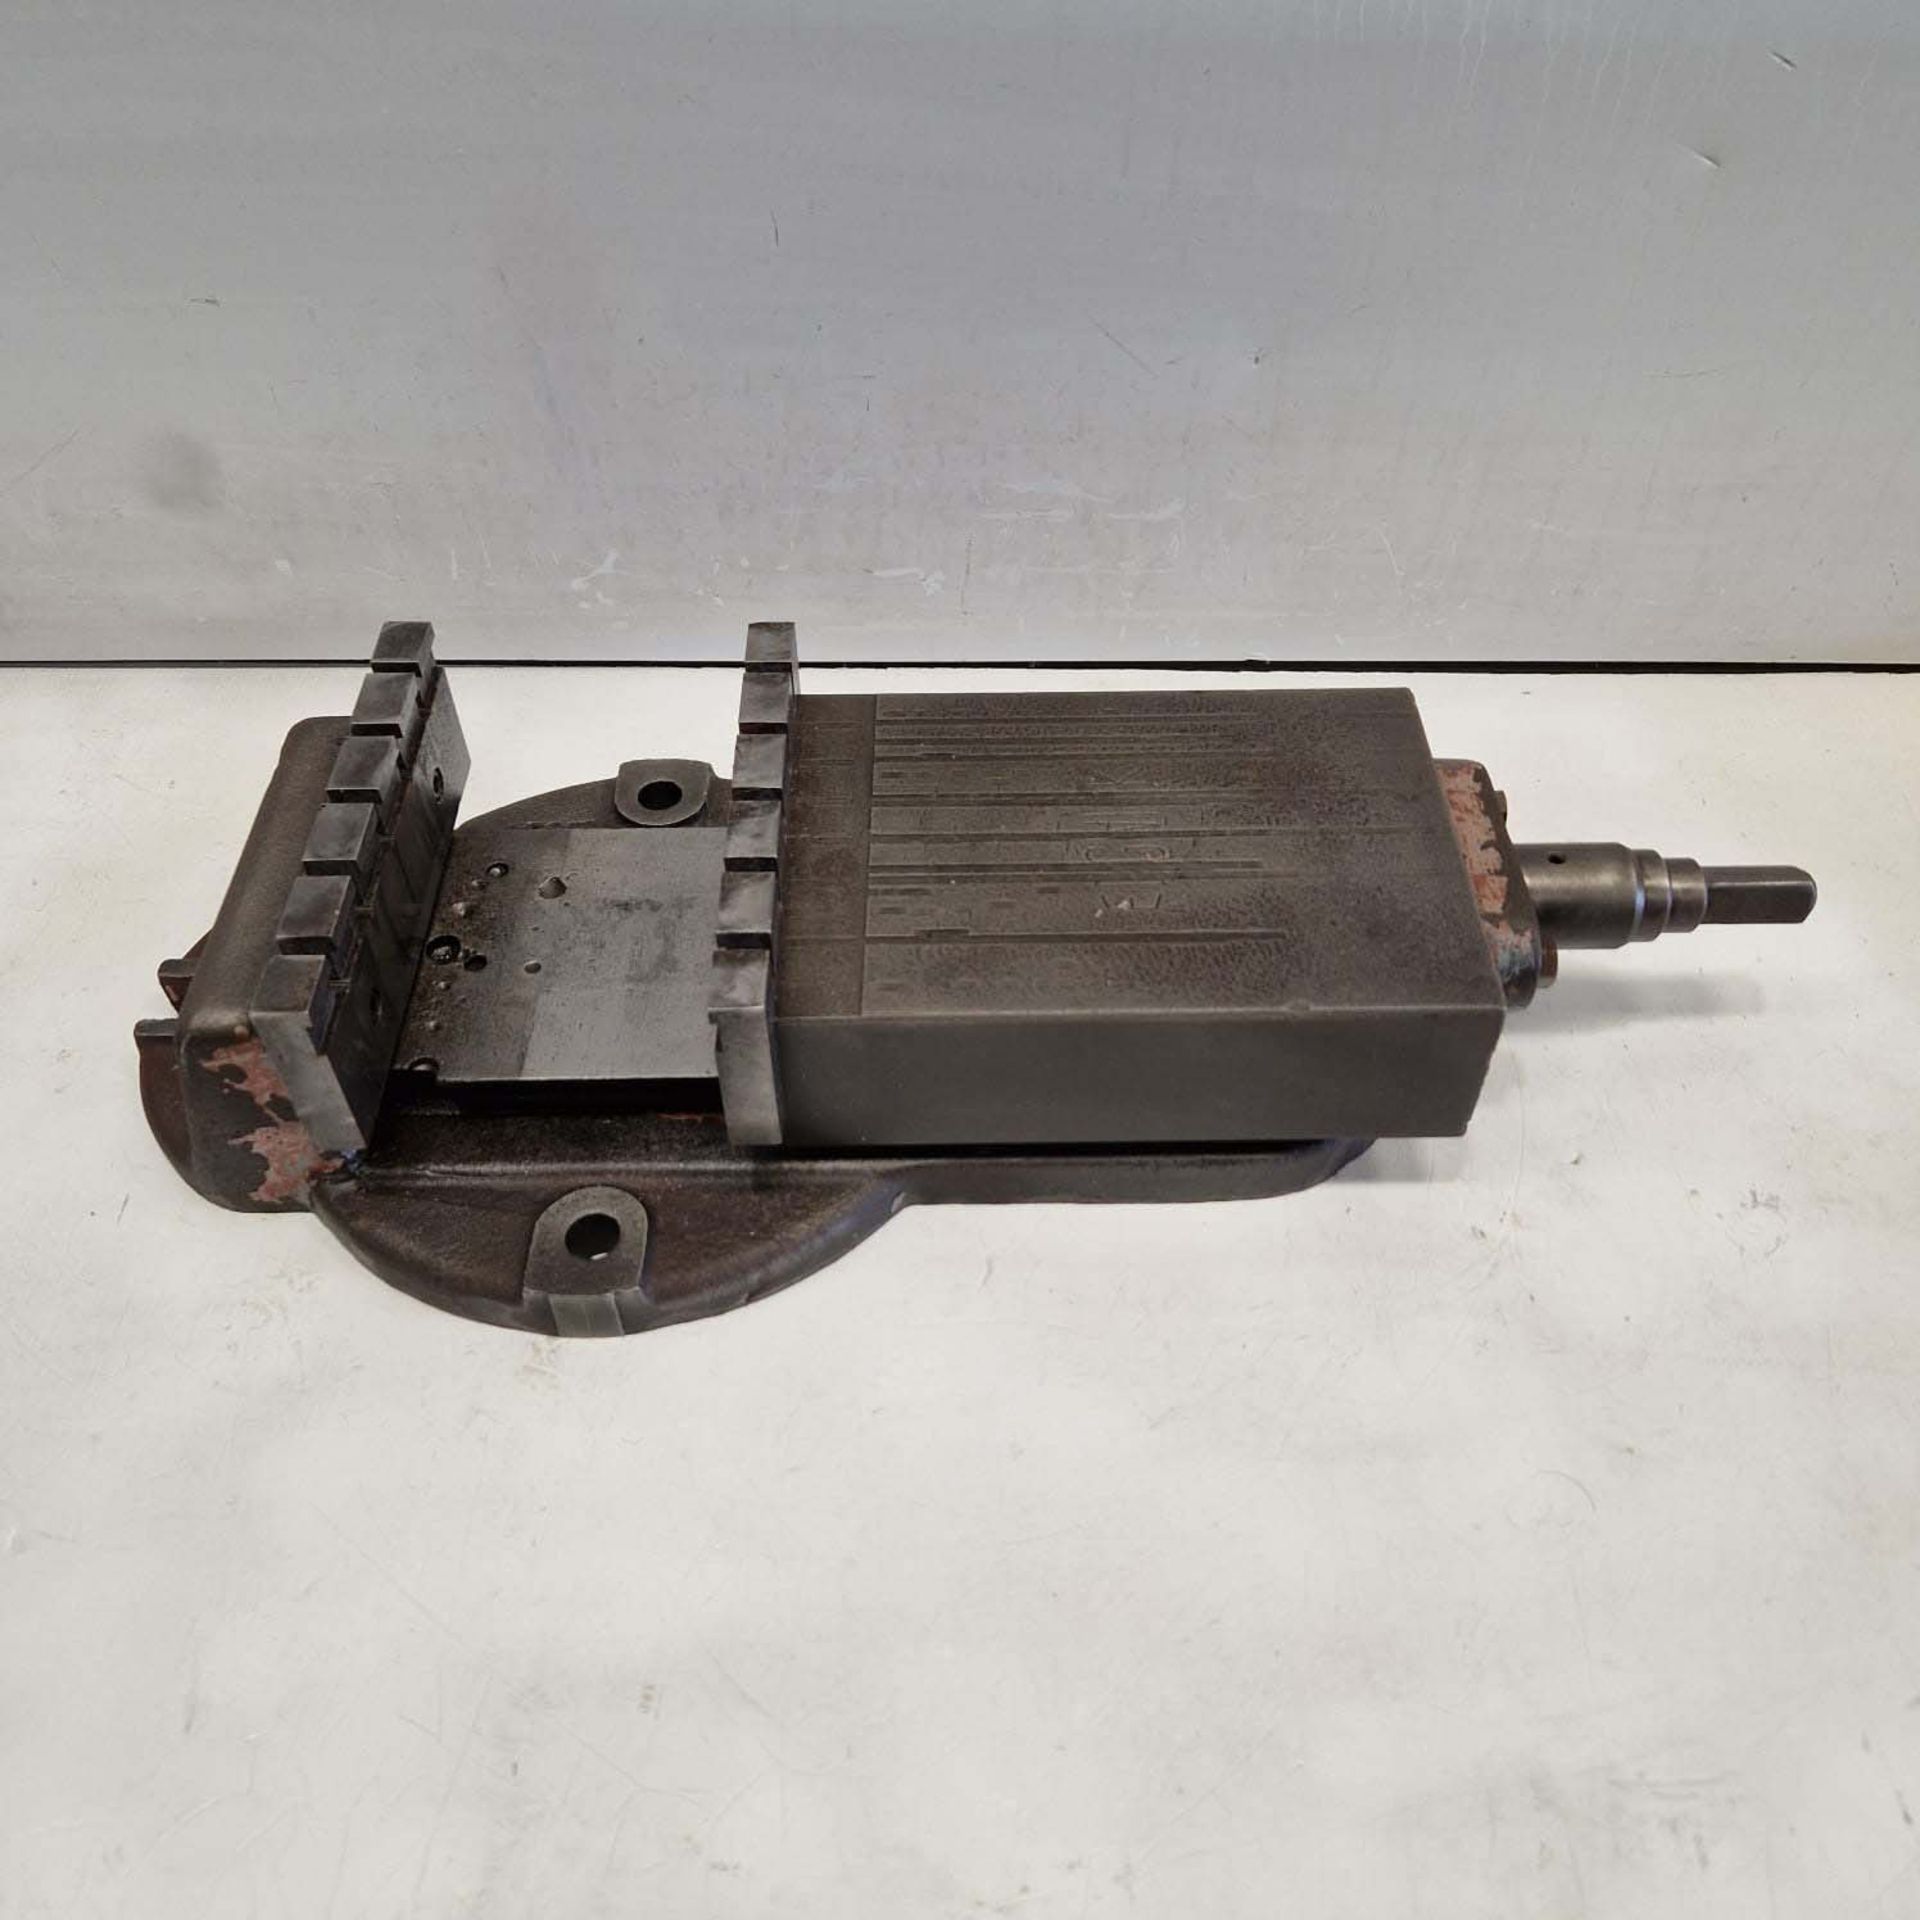 Edgwick 6" Machine Vice. Width of Jaws 7". Height of Jaws 2 1/2". Max Opening of Jaws 6".